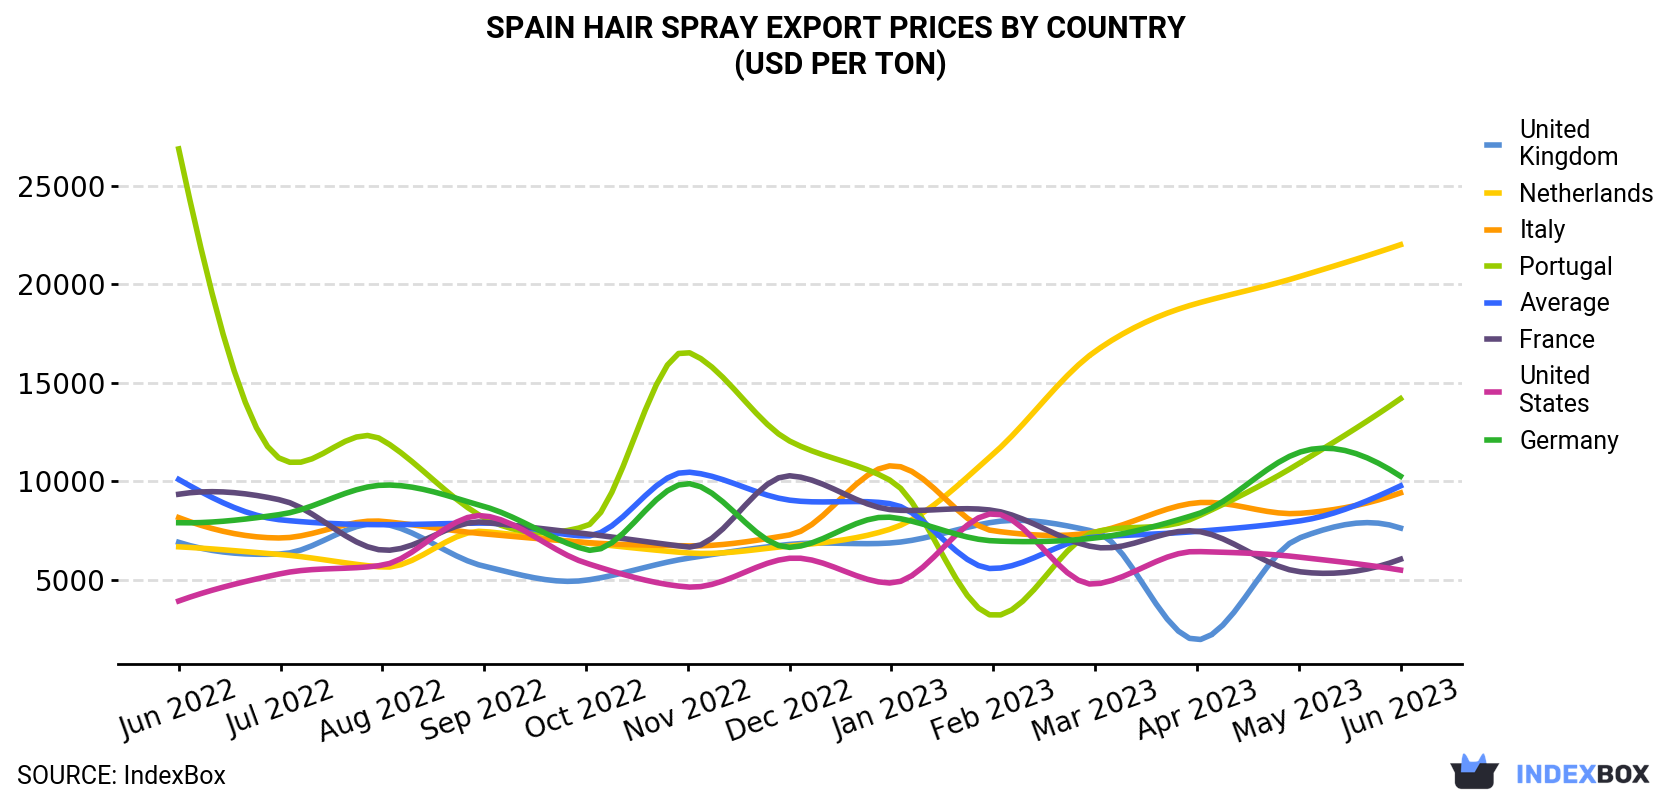 Spain Hair Spray Export Prices By Country (USD Per Ton)